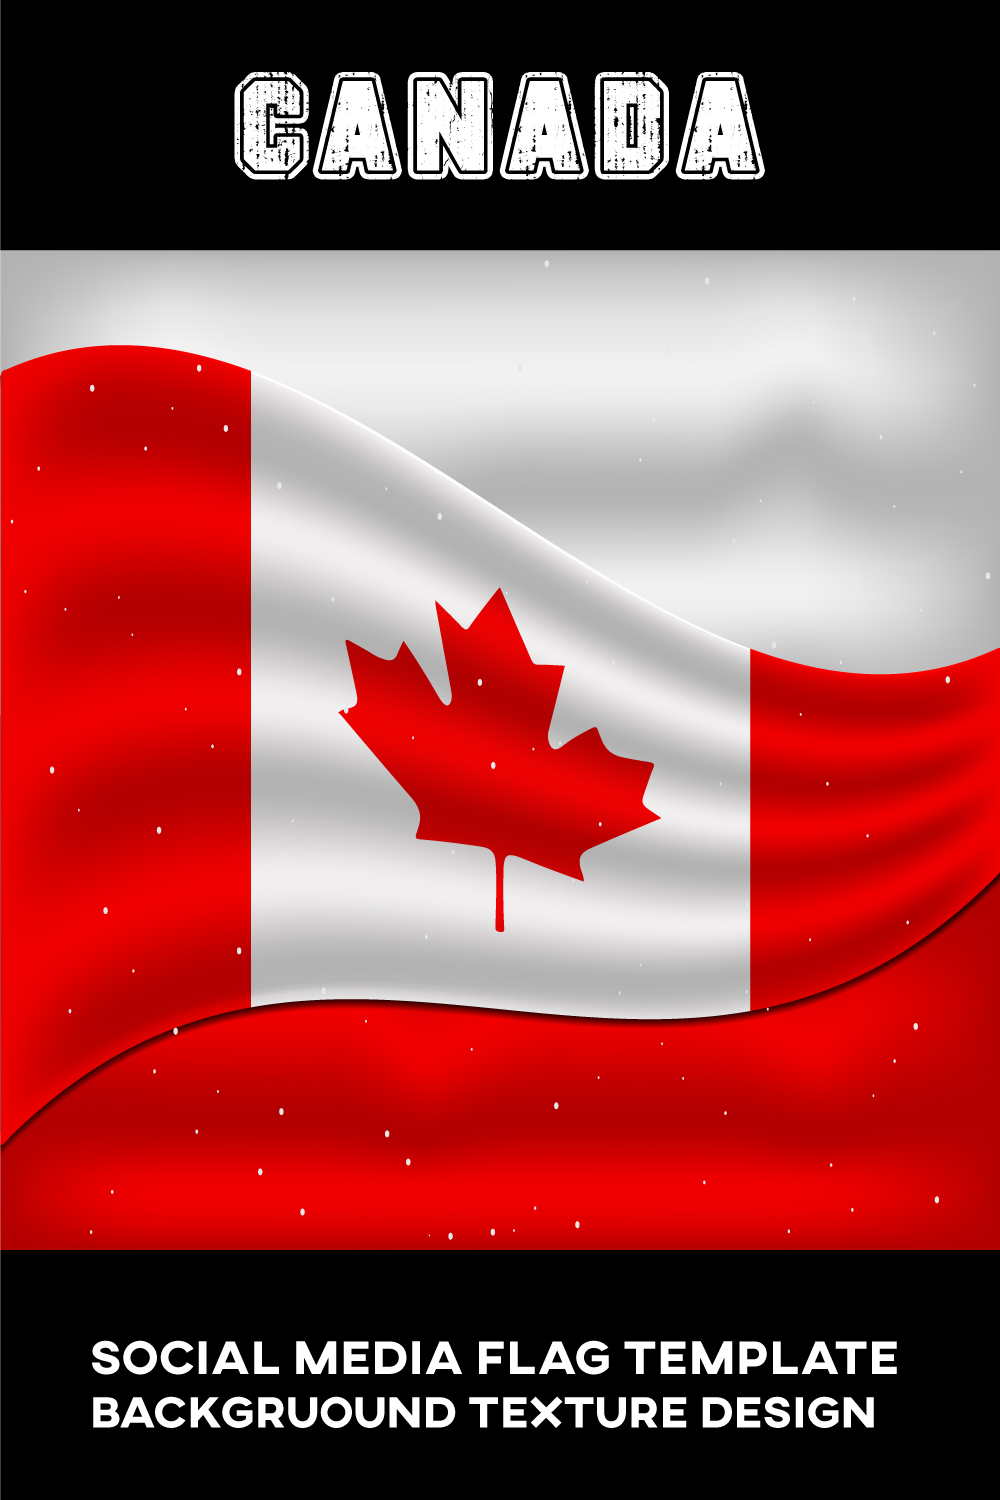 Charming image of the flag of Canada.